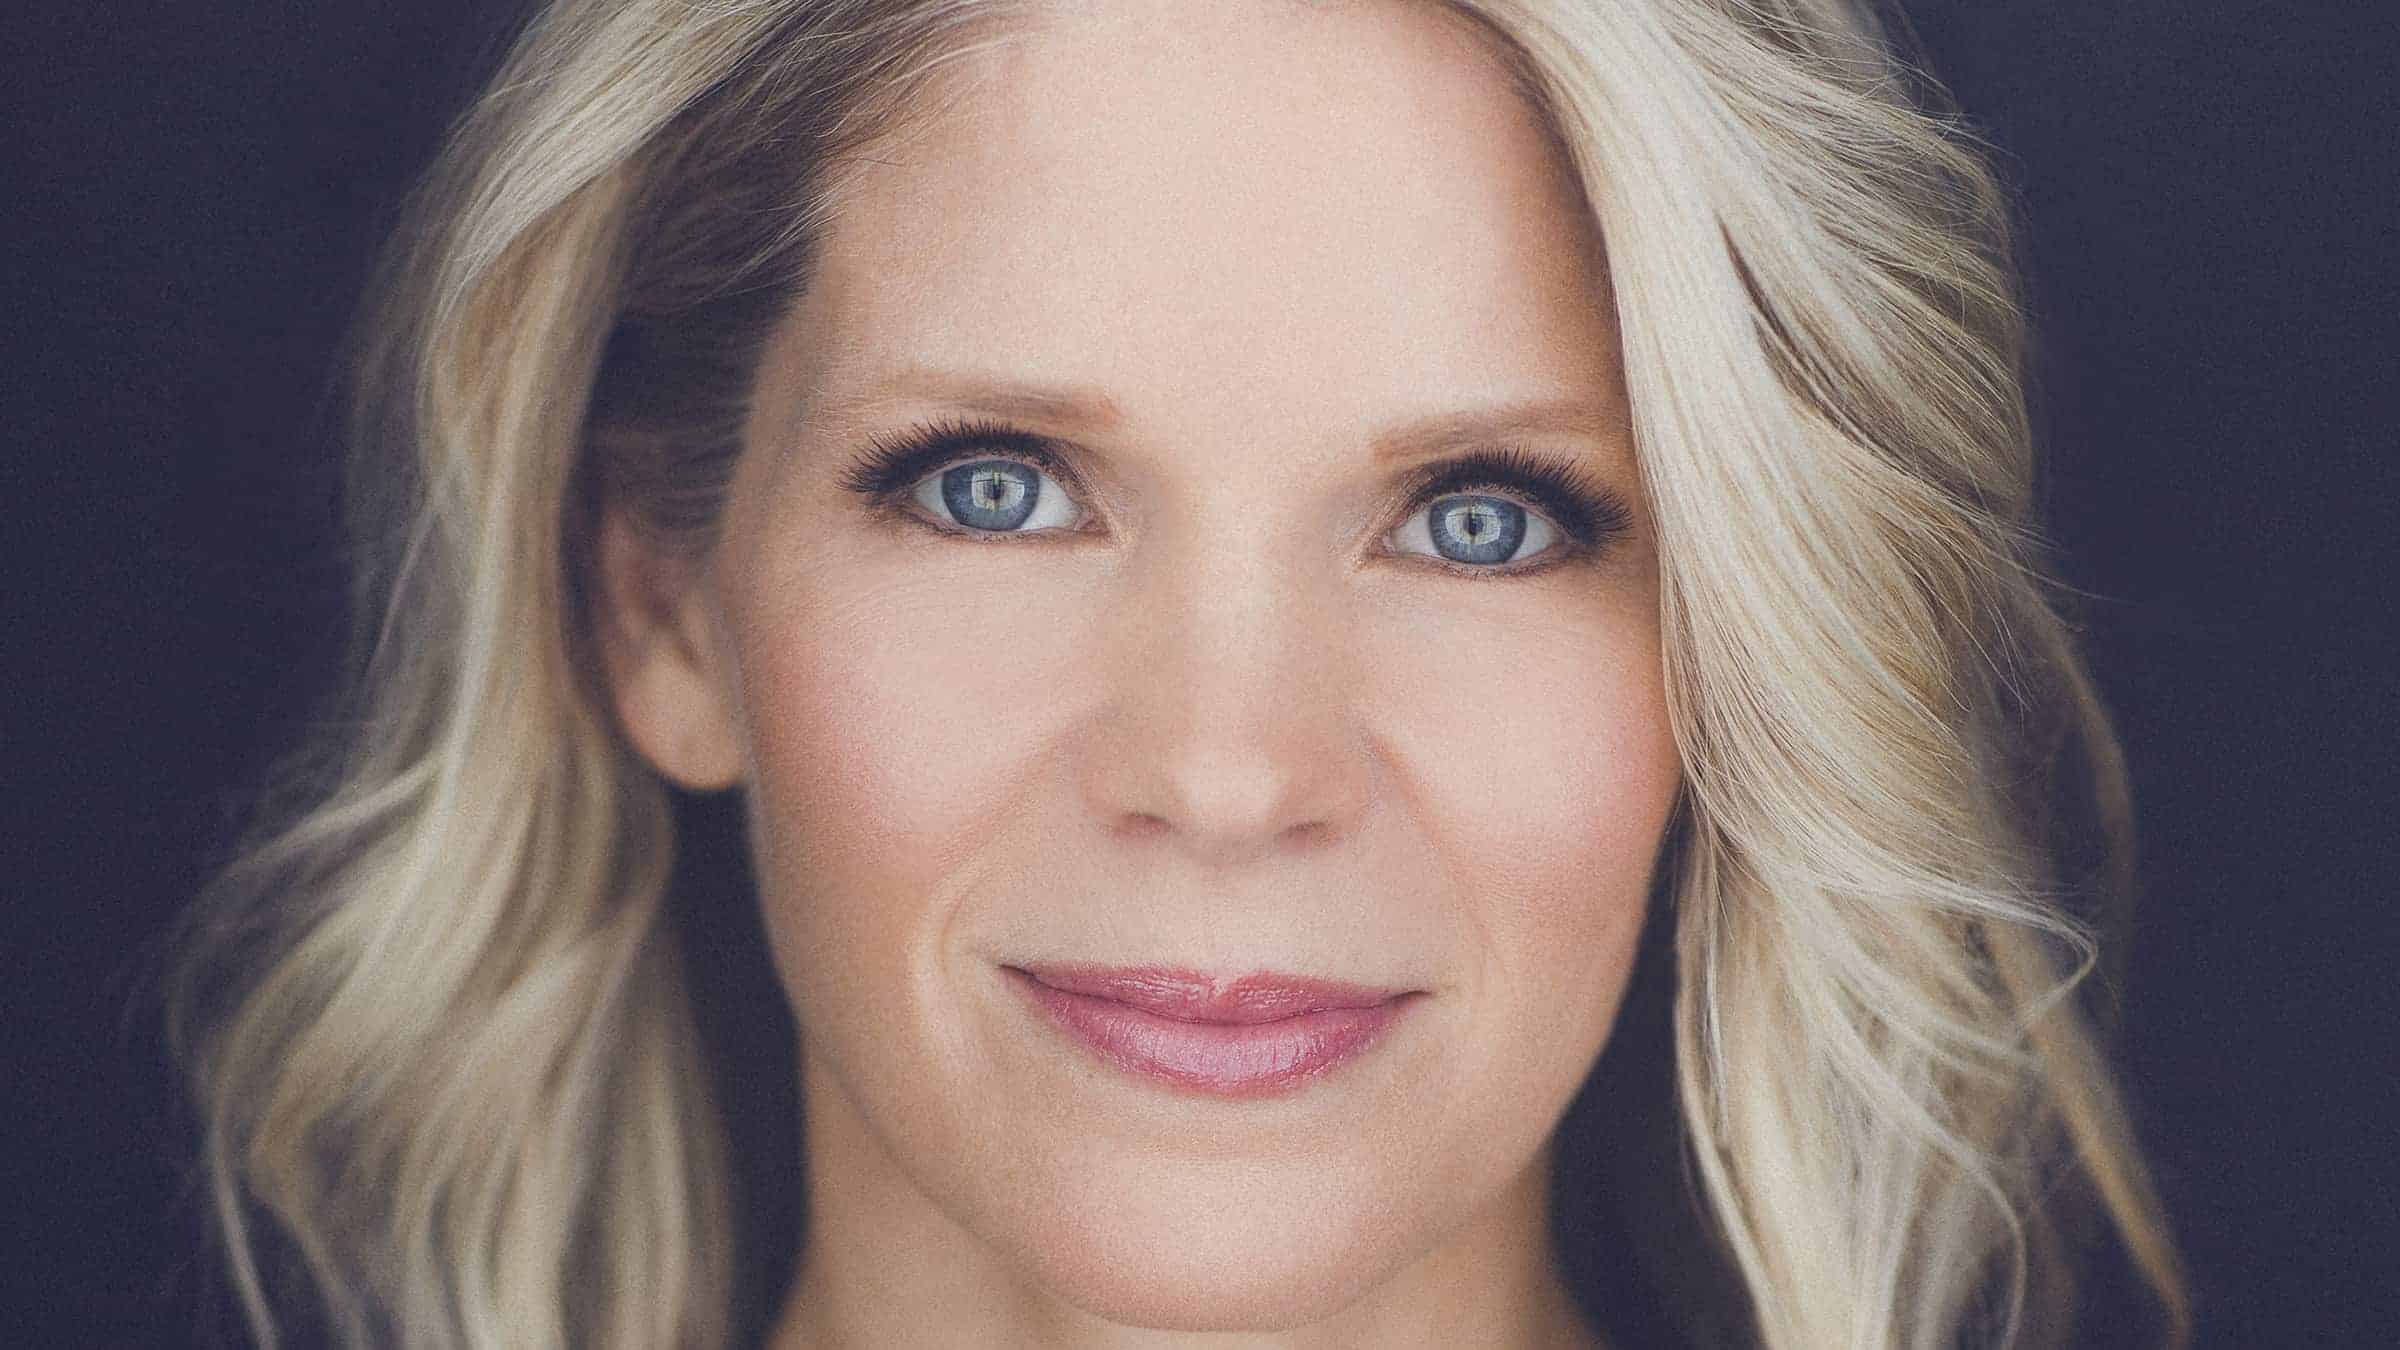 Kelli O'Hara will perform Broadway hits with Berkshire Theatre Group.